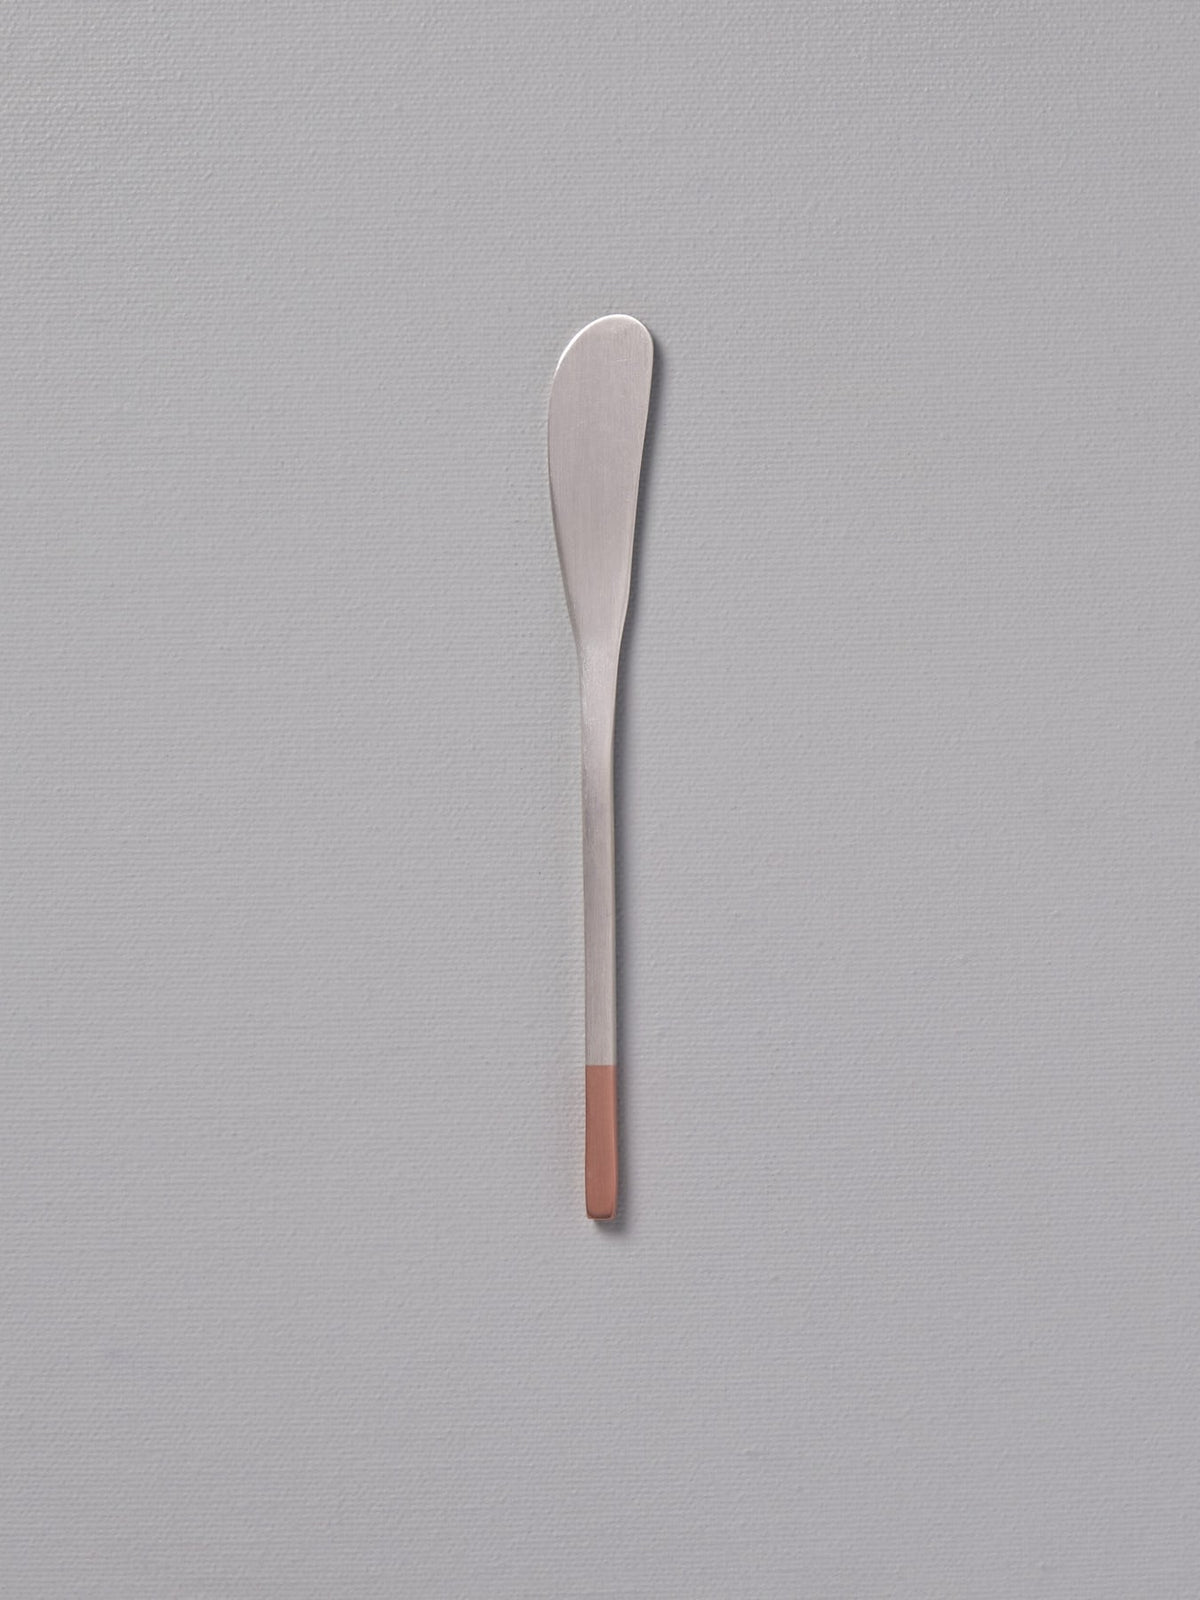 A Copper &amp; Stainless Steel Butter Knife by Kobo Aizawa sitting on a gray surface.